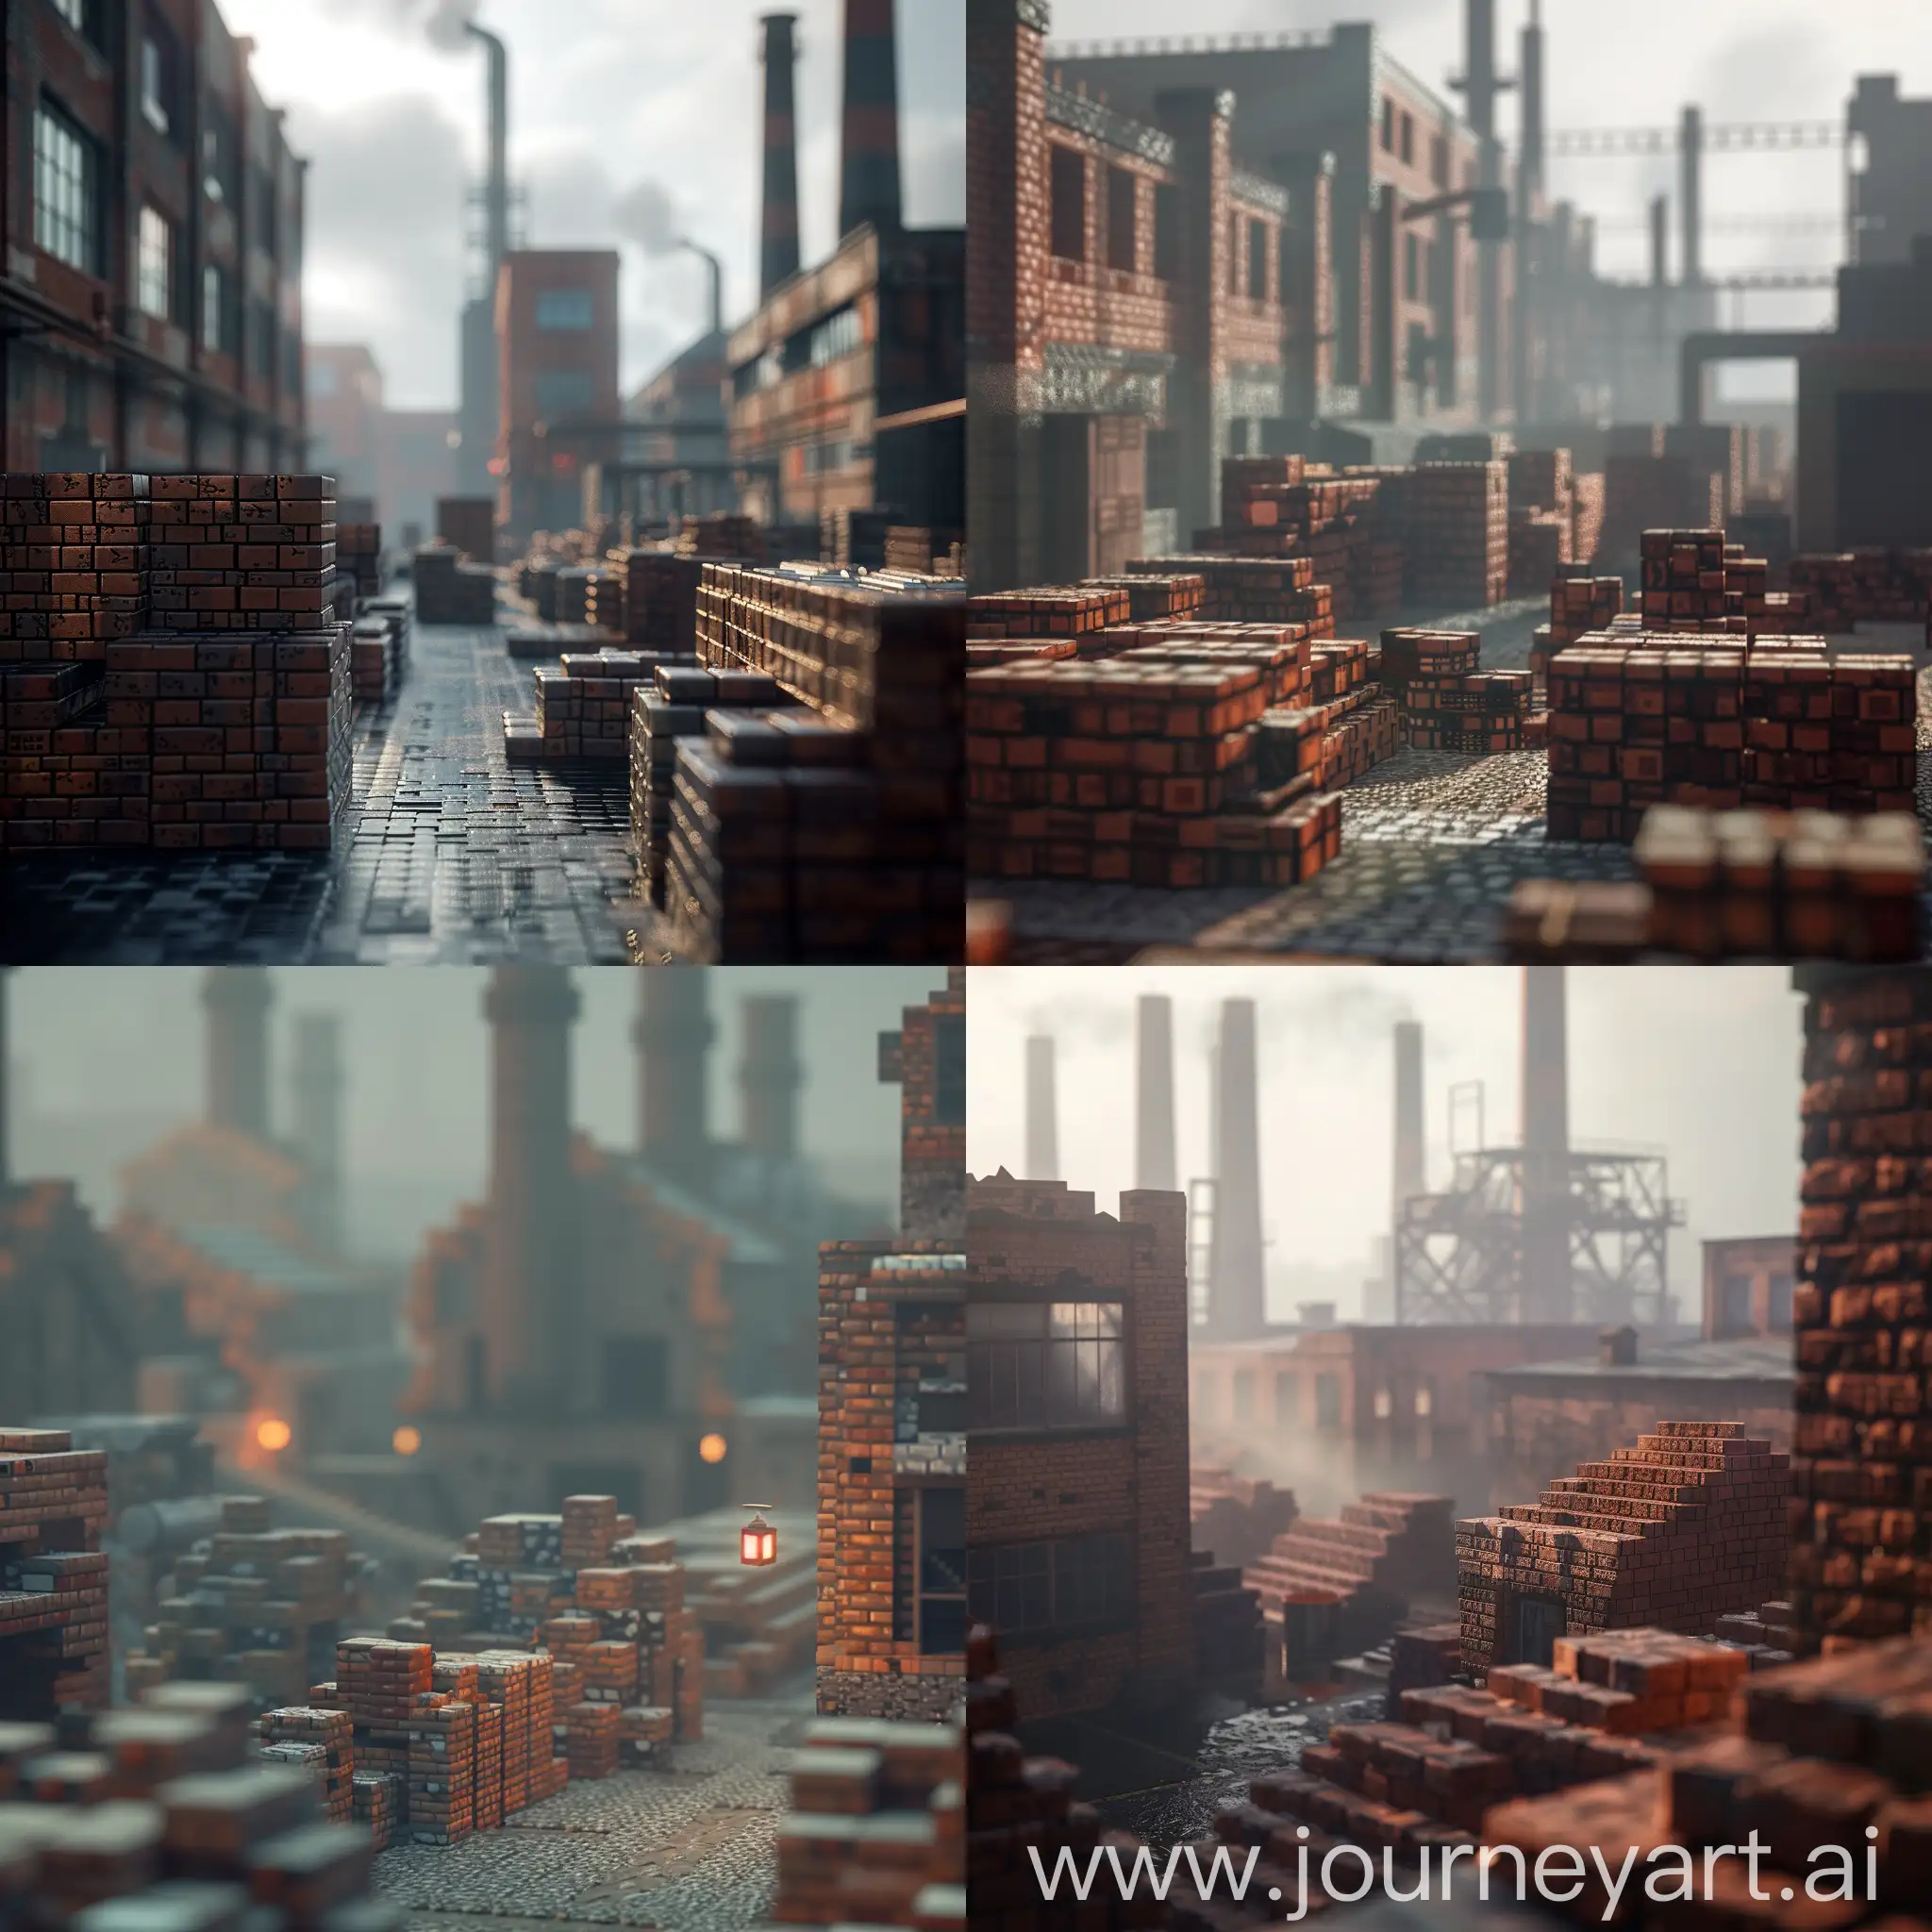 Brick-Factory-Exterior-View-with-Realistic-Stacks-of-Bricks